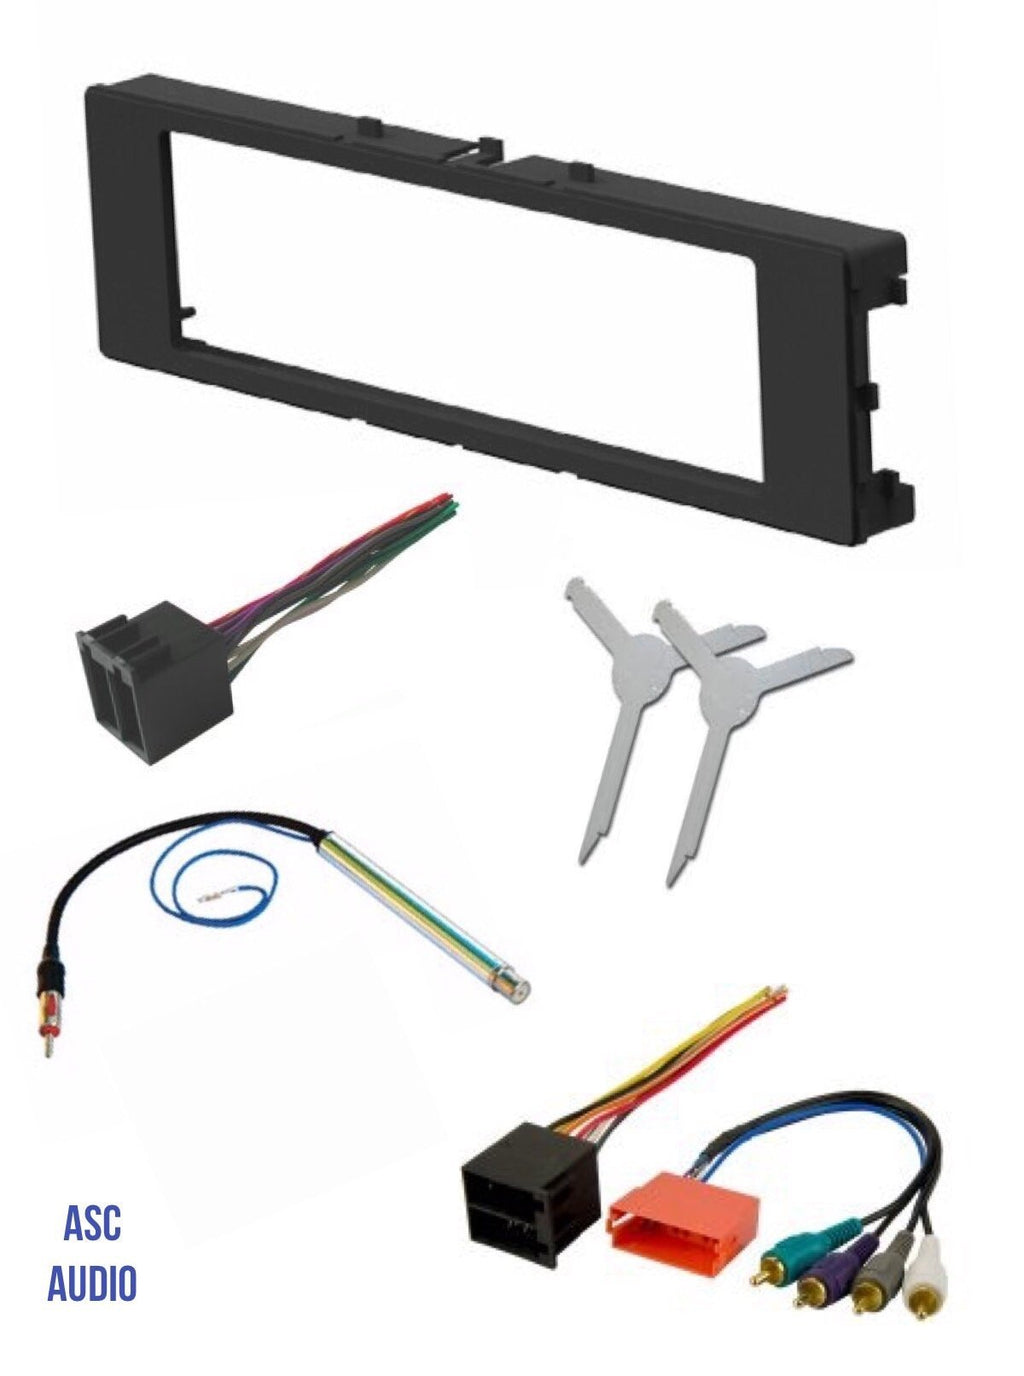 ASC Car Stereo Install Dash Kit, Wire Harness, Antenna Adapter, and Radio Removal Tool for Installing an Aftermarket Single Din Radio for 1996-1999 Audi A4 A6 A8 and 2000-2006 Audi TT Vehicles - LeoForward Australia